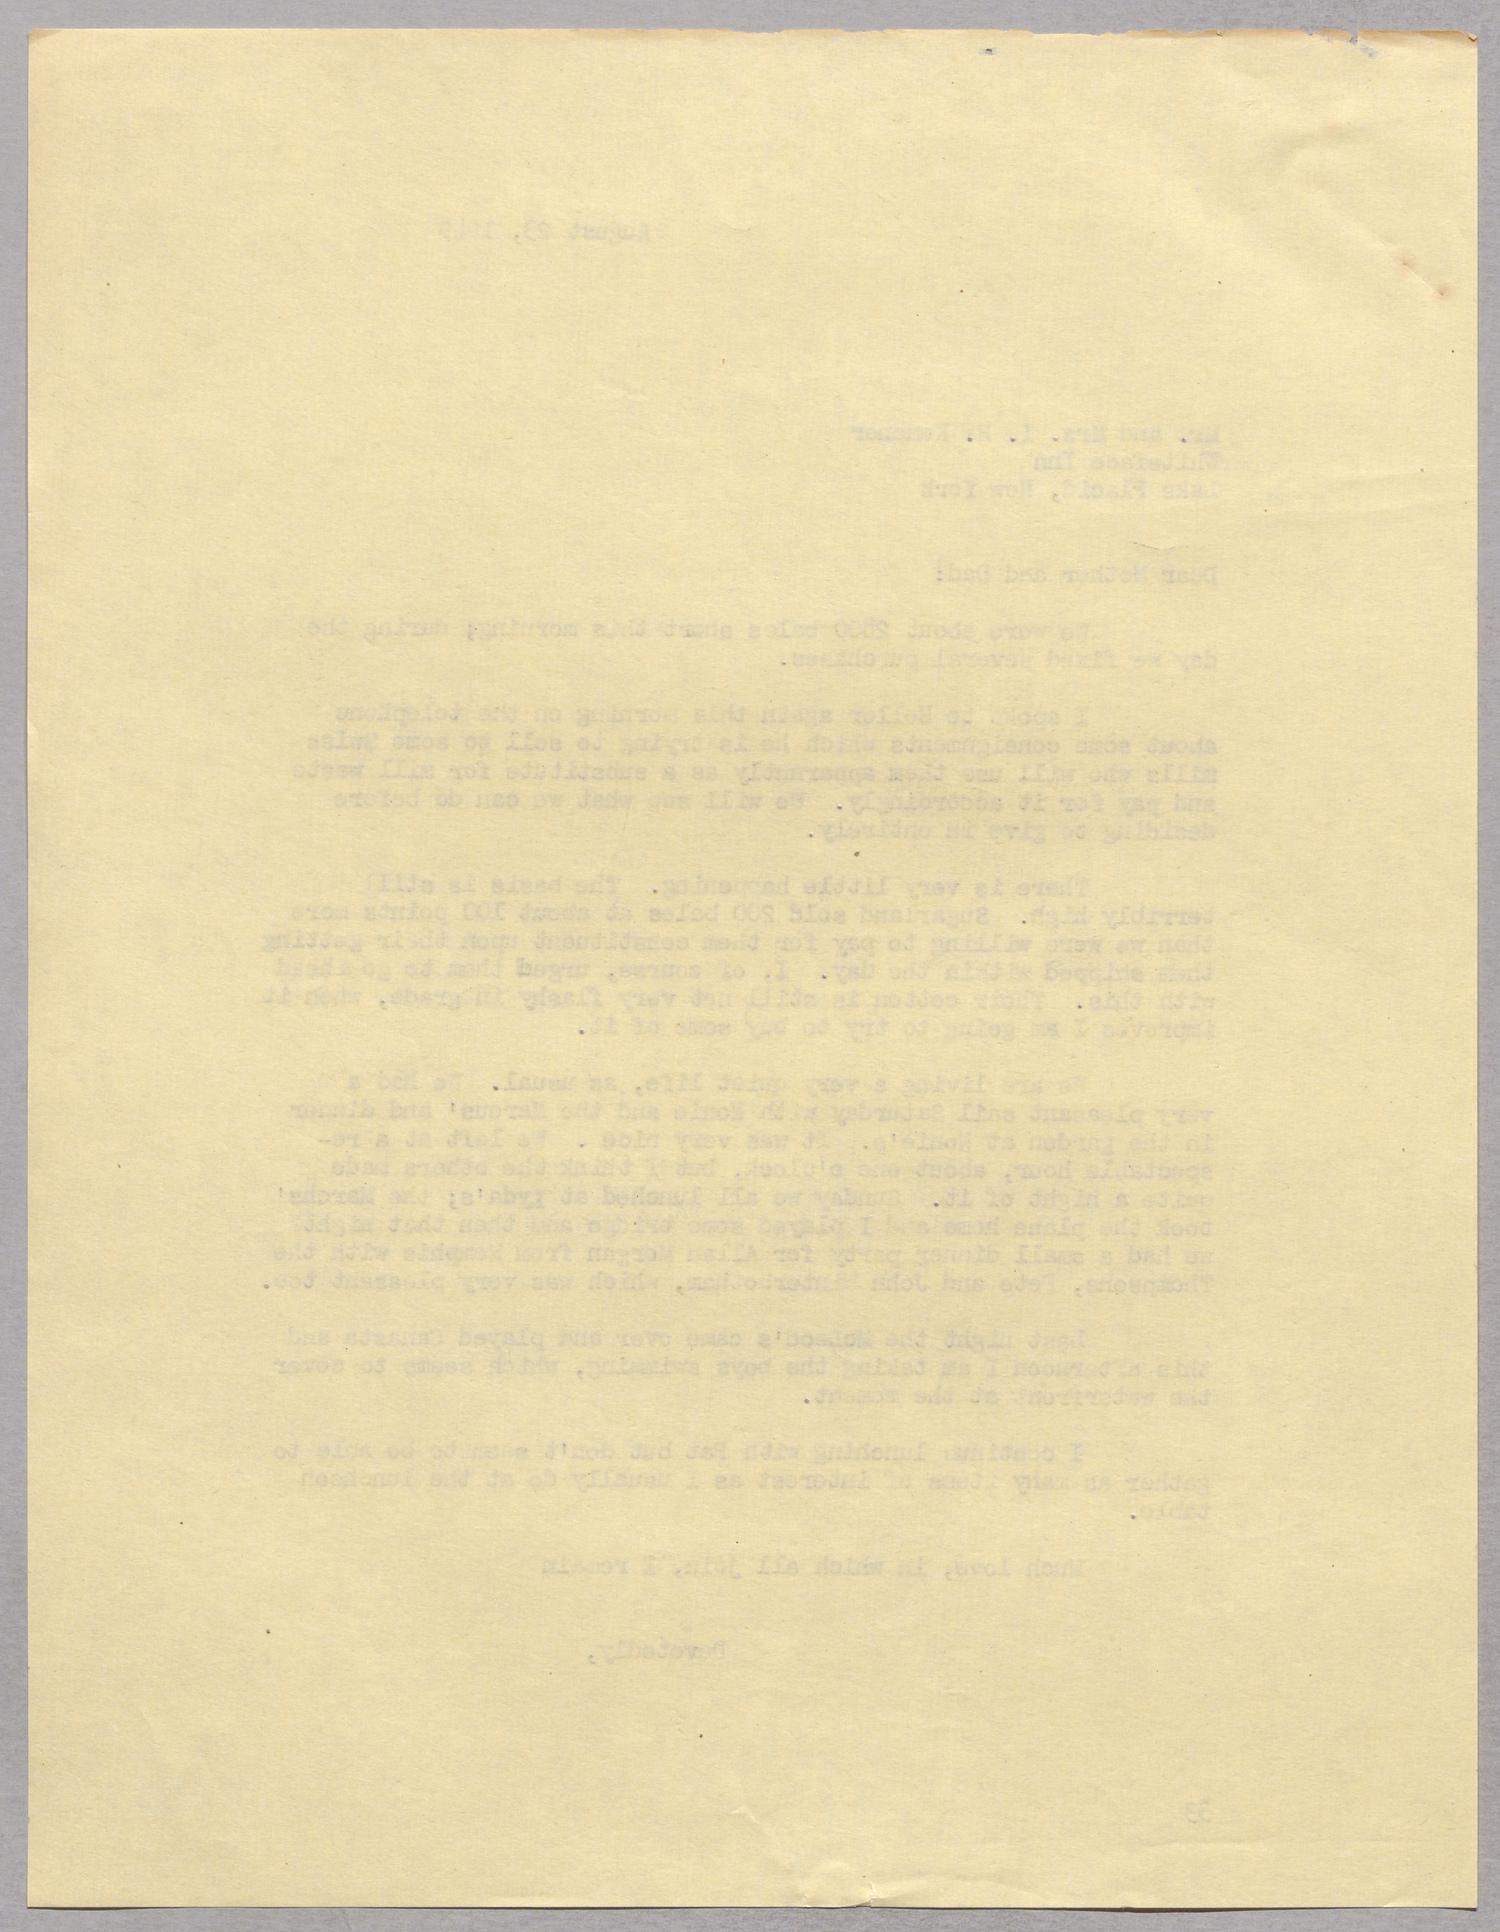 [Letter from Harris Leon Kempner to Mr. and Mrs. I. H. Kempner, August 23, 1949]
                                                
                                                    [Sequence #]: 2 of 2
                                                